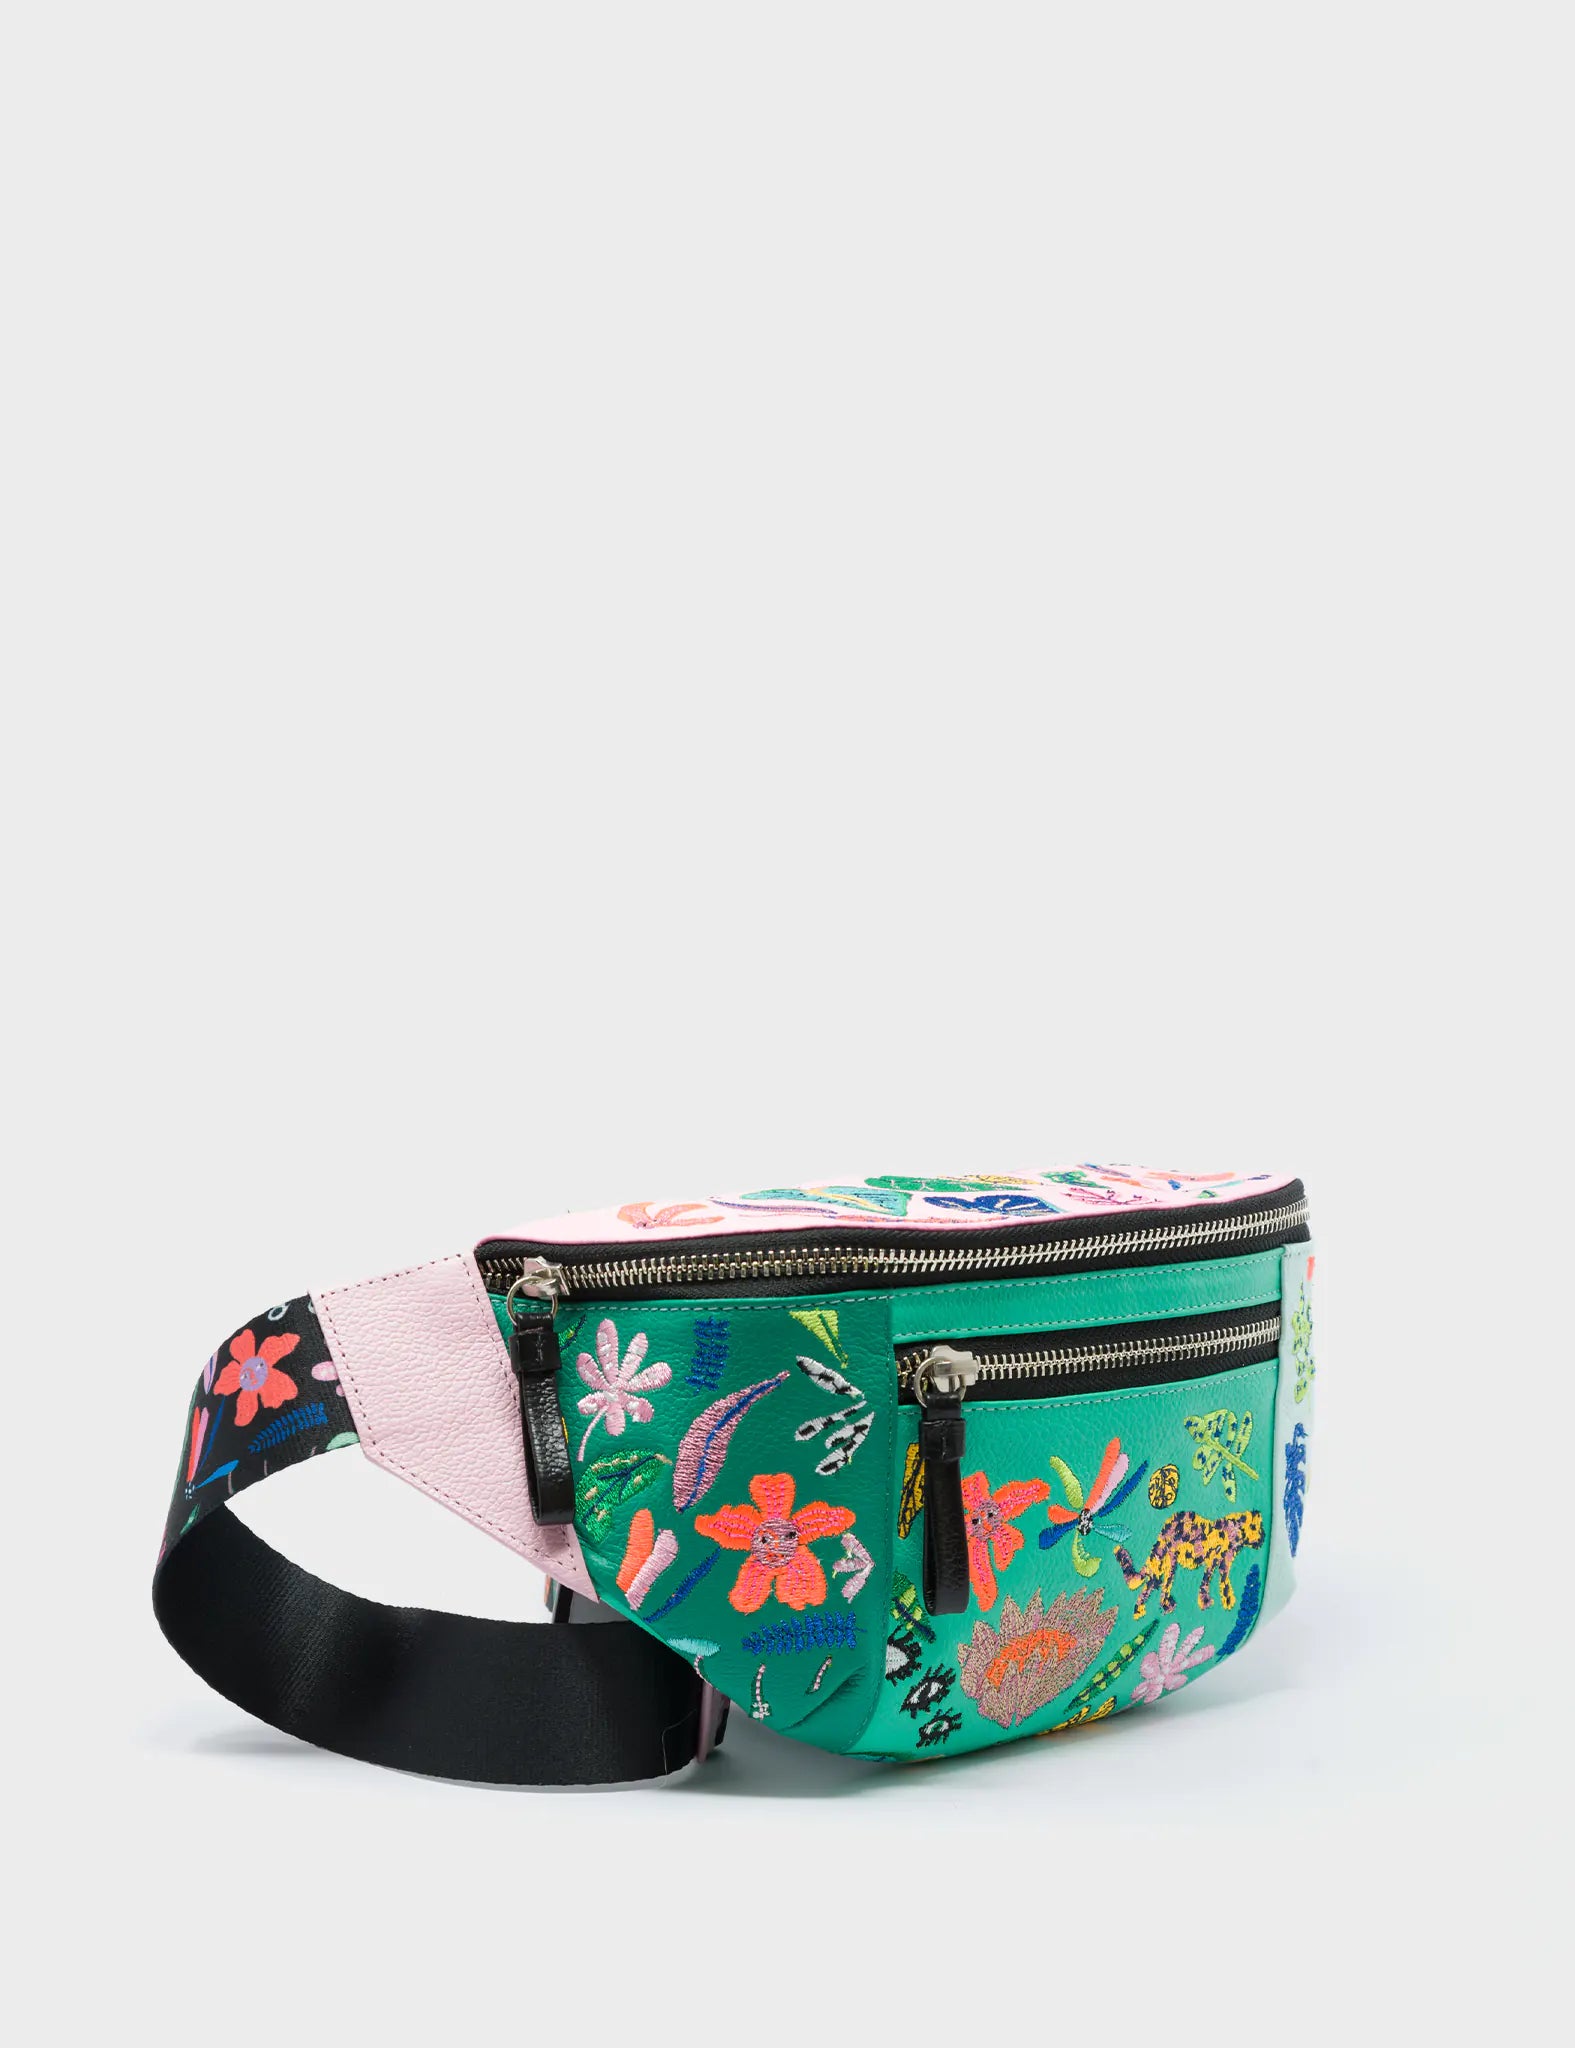 Harold Fanny Pack Green And Lilac Leather - El Trópico Embroidery Design